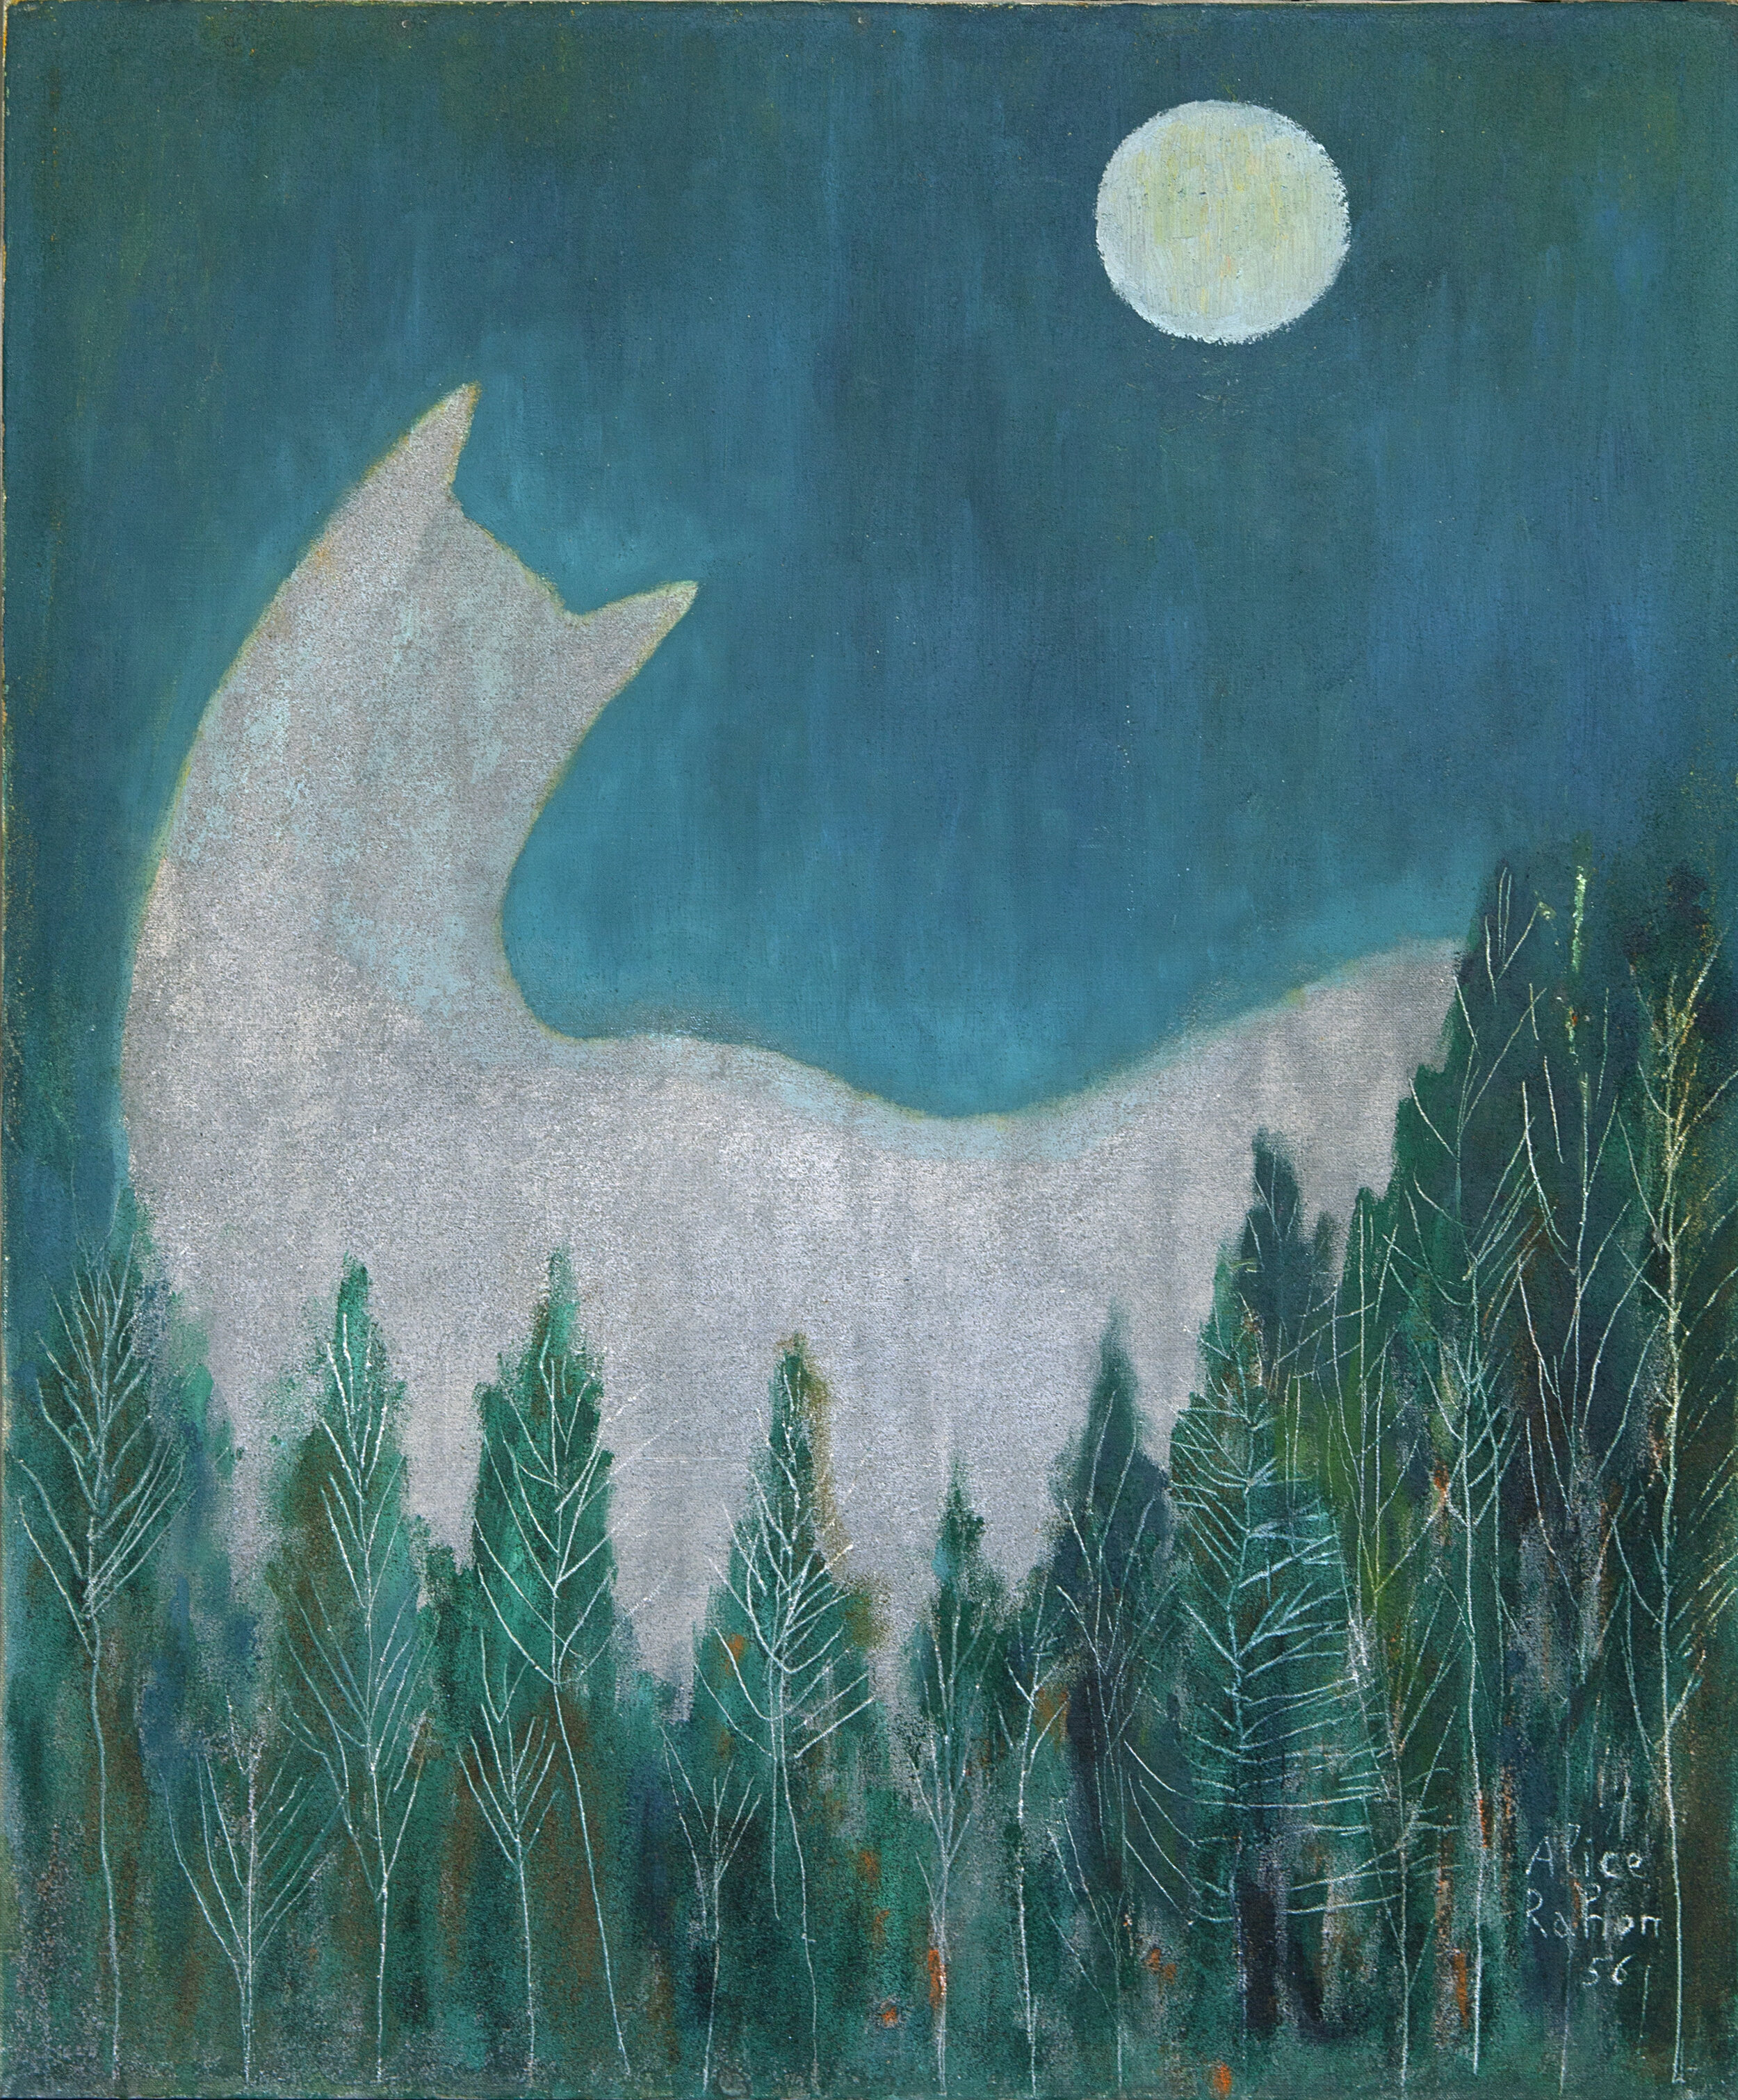  Alice Rahon,  Su majestad y la luna (Her Majesty and the Moon) , 1956, oil and sand on canvas, 23 13/16 x 19 13/16 inches (60.5 x 50.3 cm) 